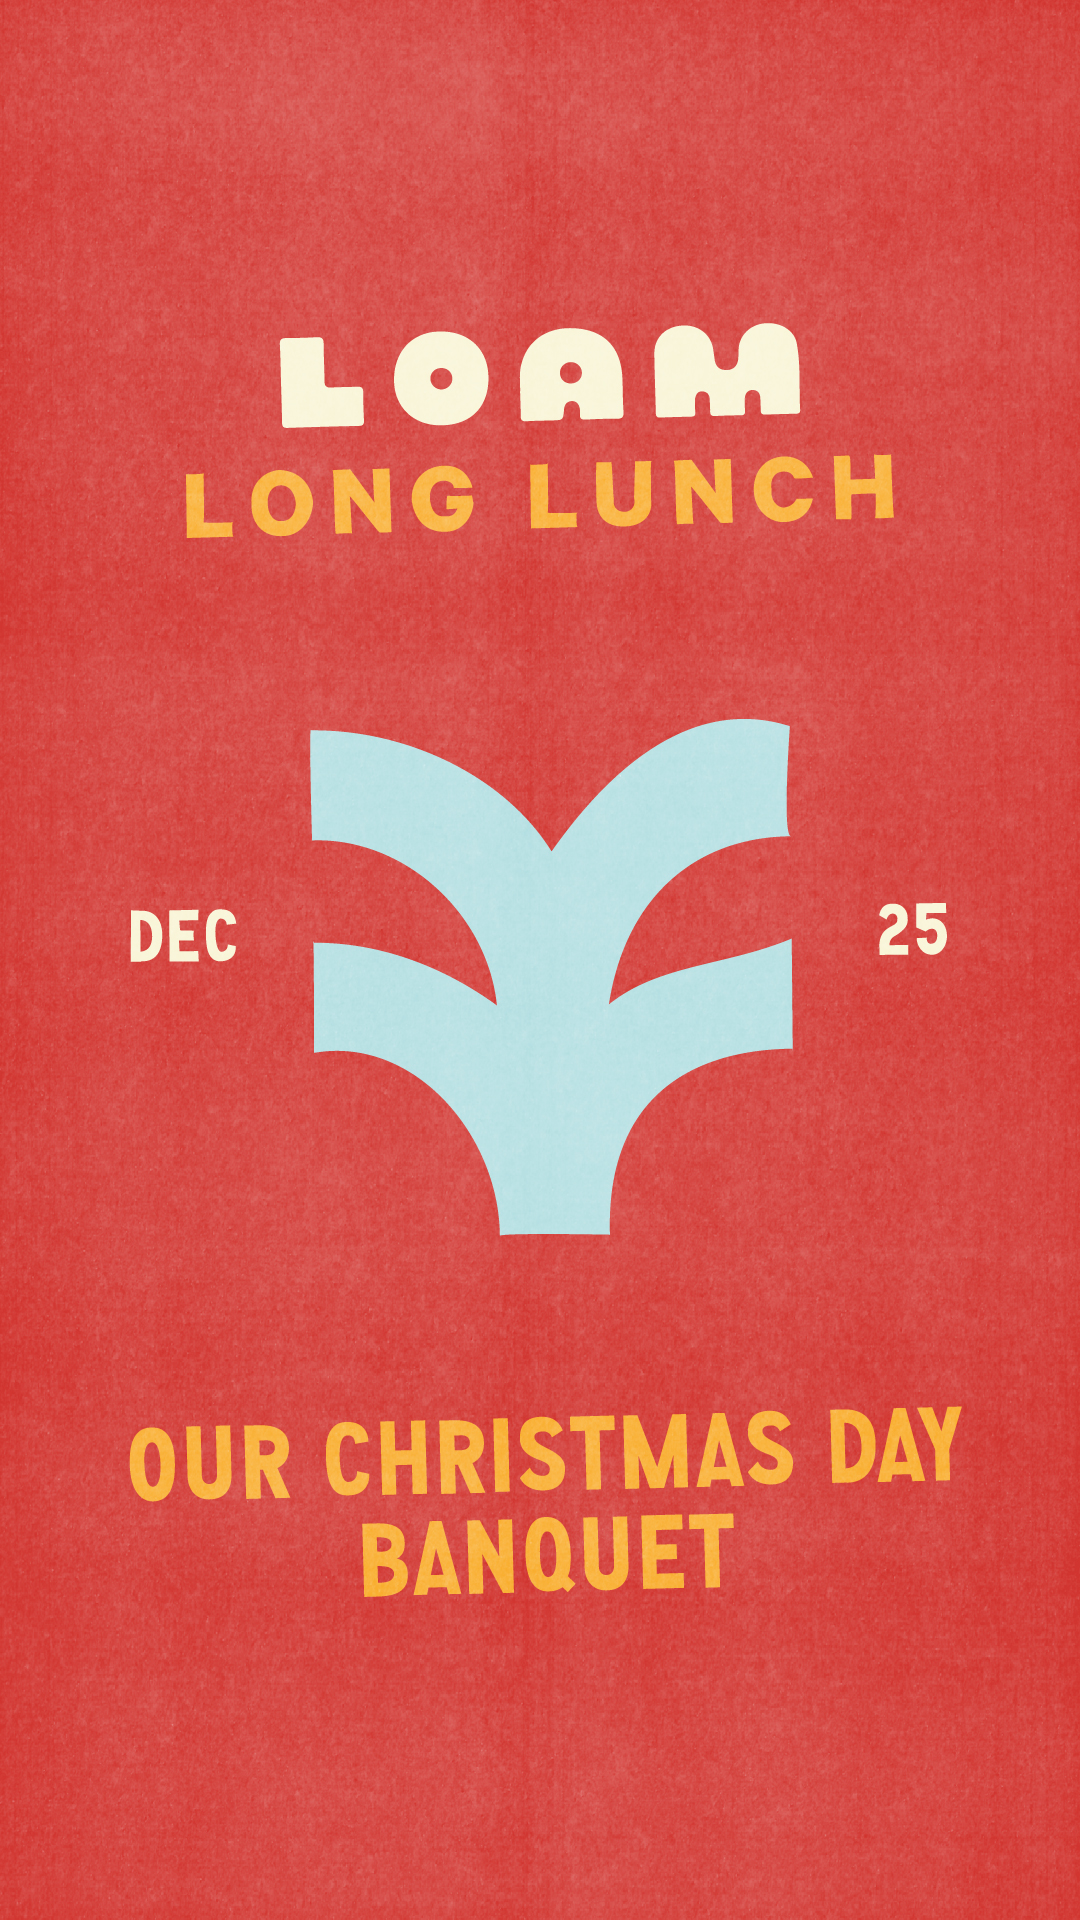 LOAM Christmas Day Banquet promo